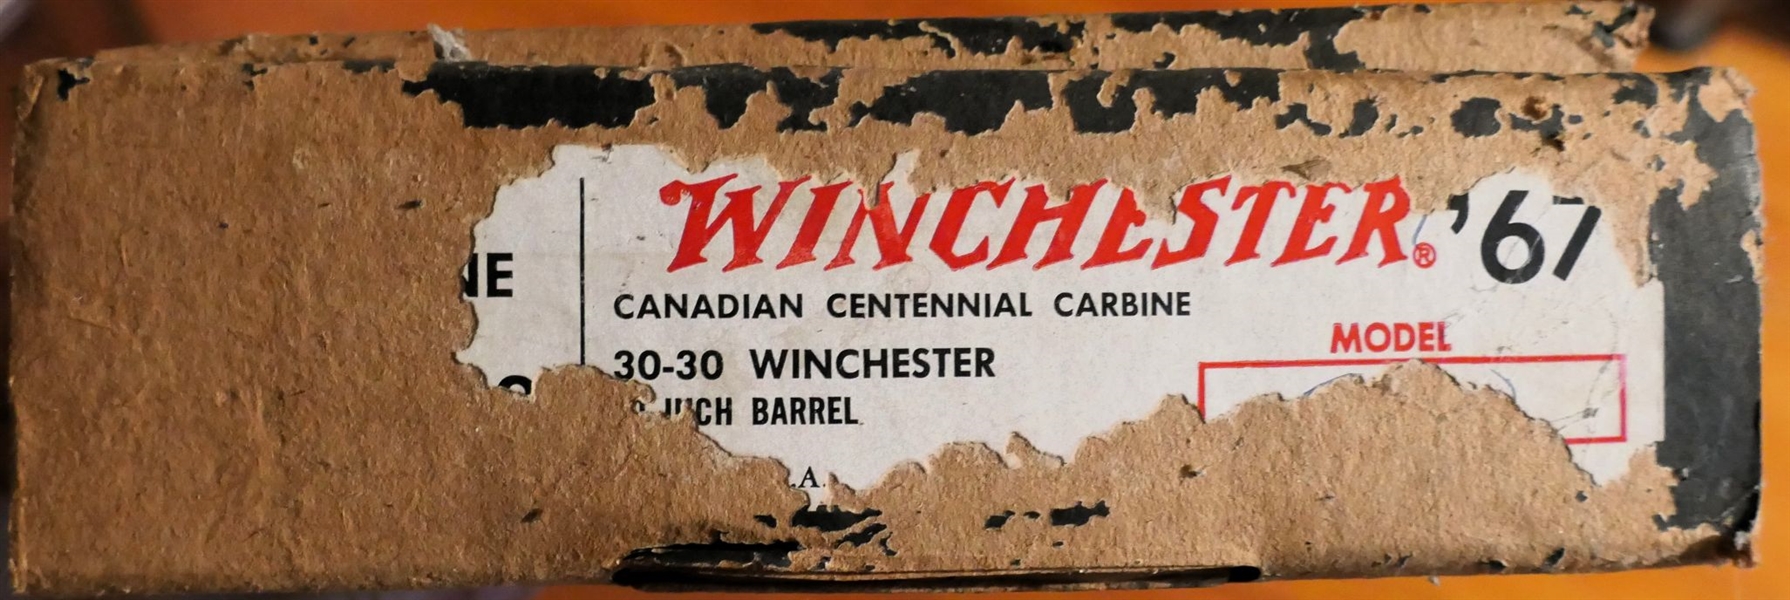 Winchester 30-30 67 Canadian Centennial Box - BOX ONLY with Certificates and Papers